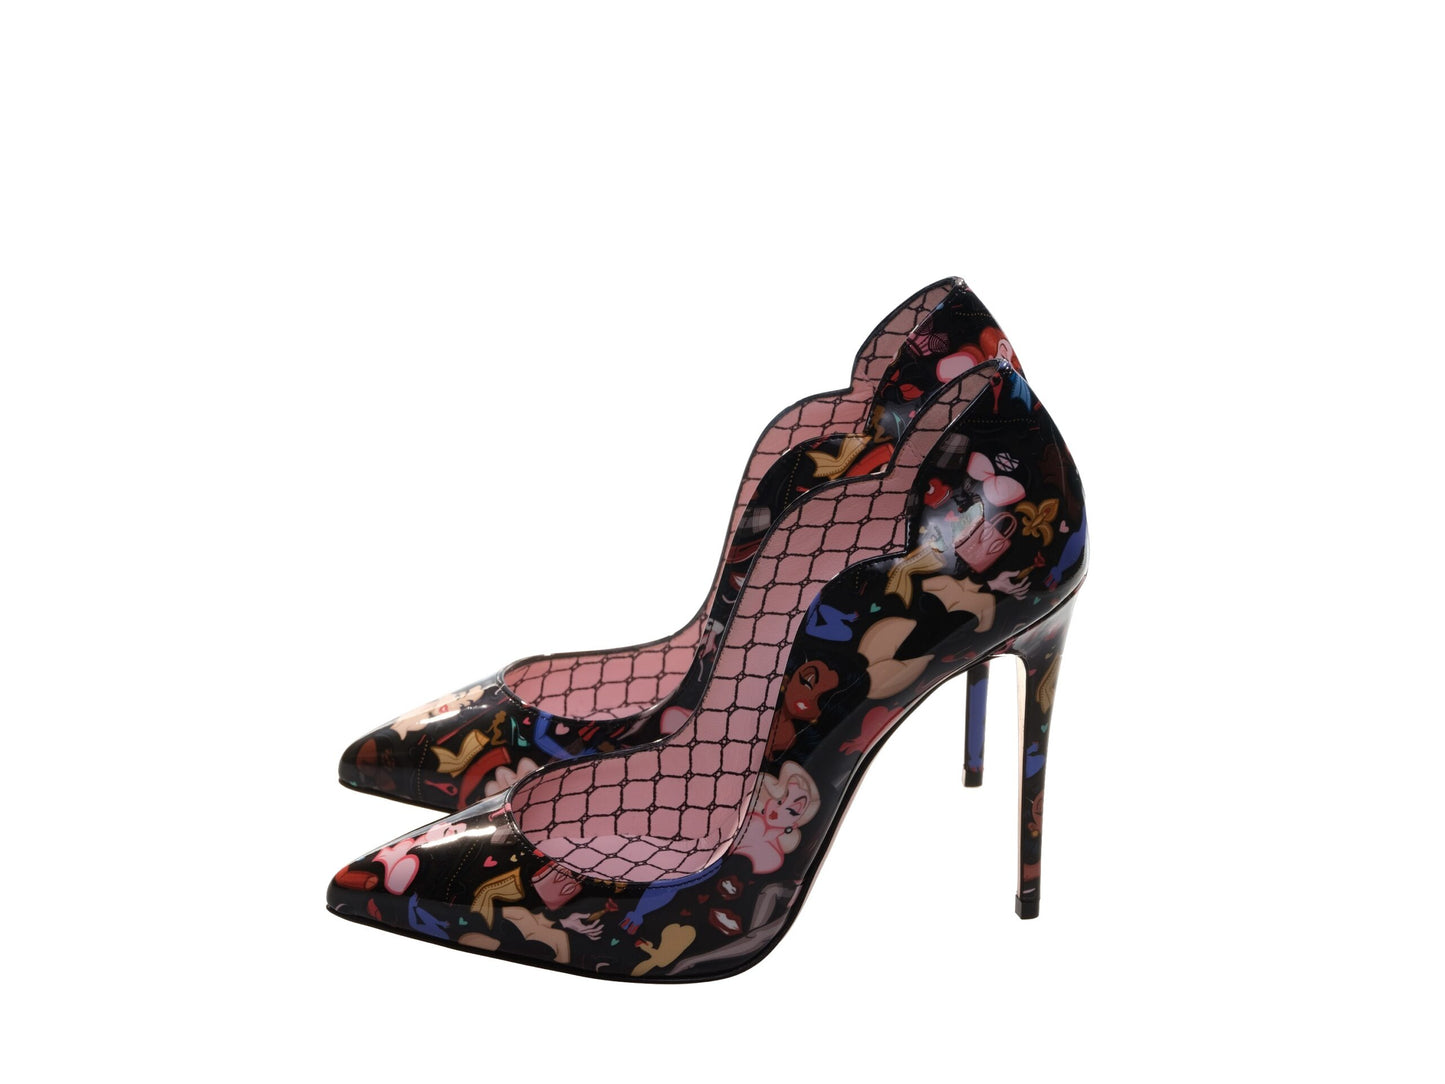 Christian Louboutin Hot Chick 100 Black Limited Edition Dr Bored Print Patent Leather High Heel Pumps